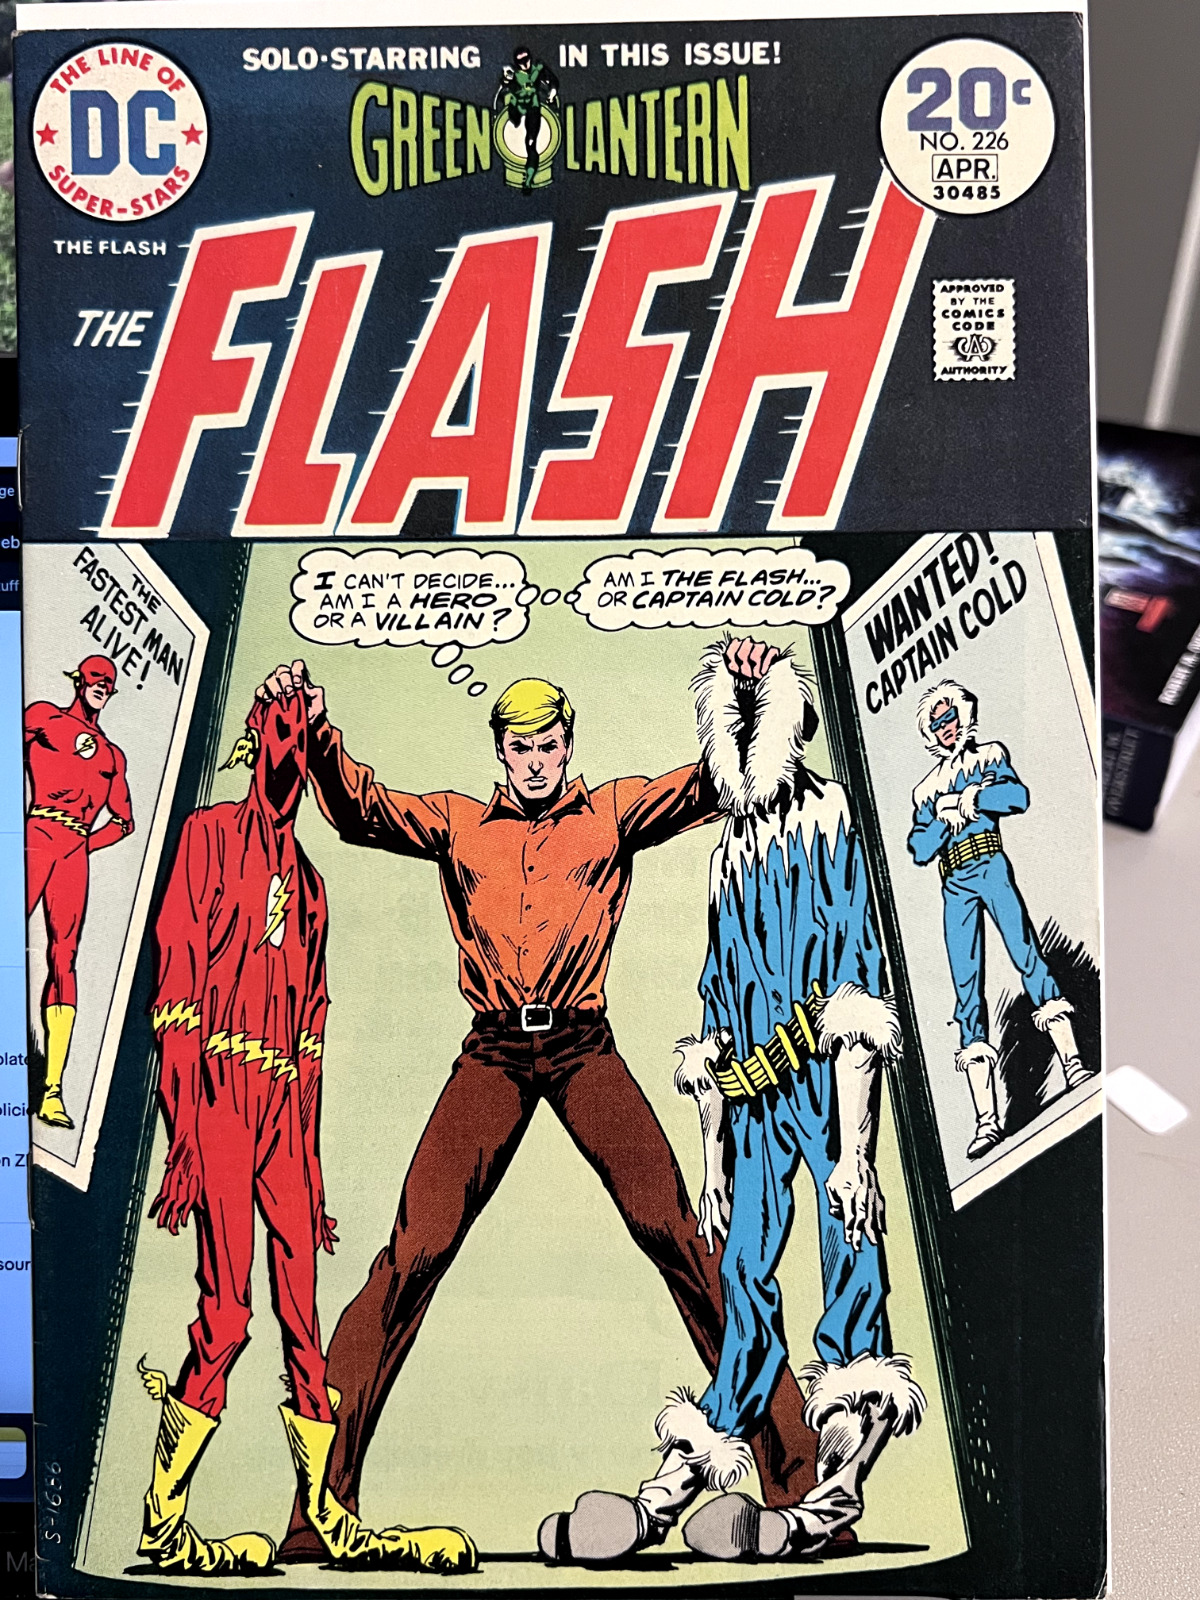 The Flash #226 VF- Captain Cold & The Flash